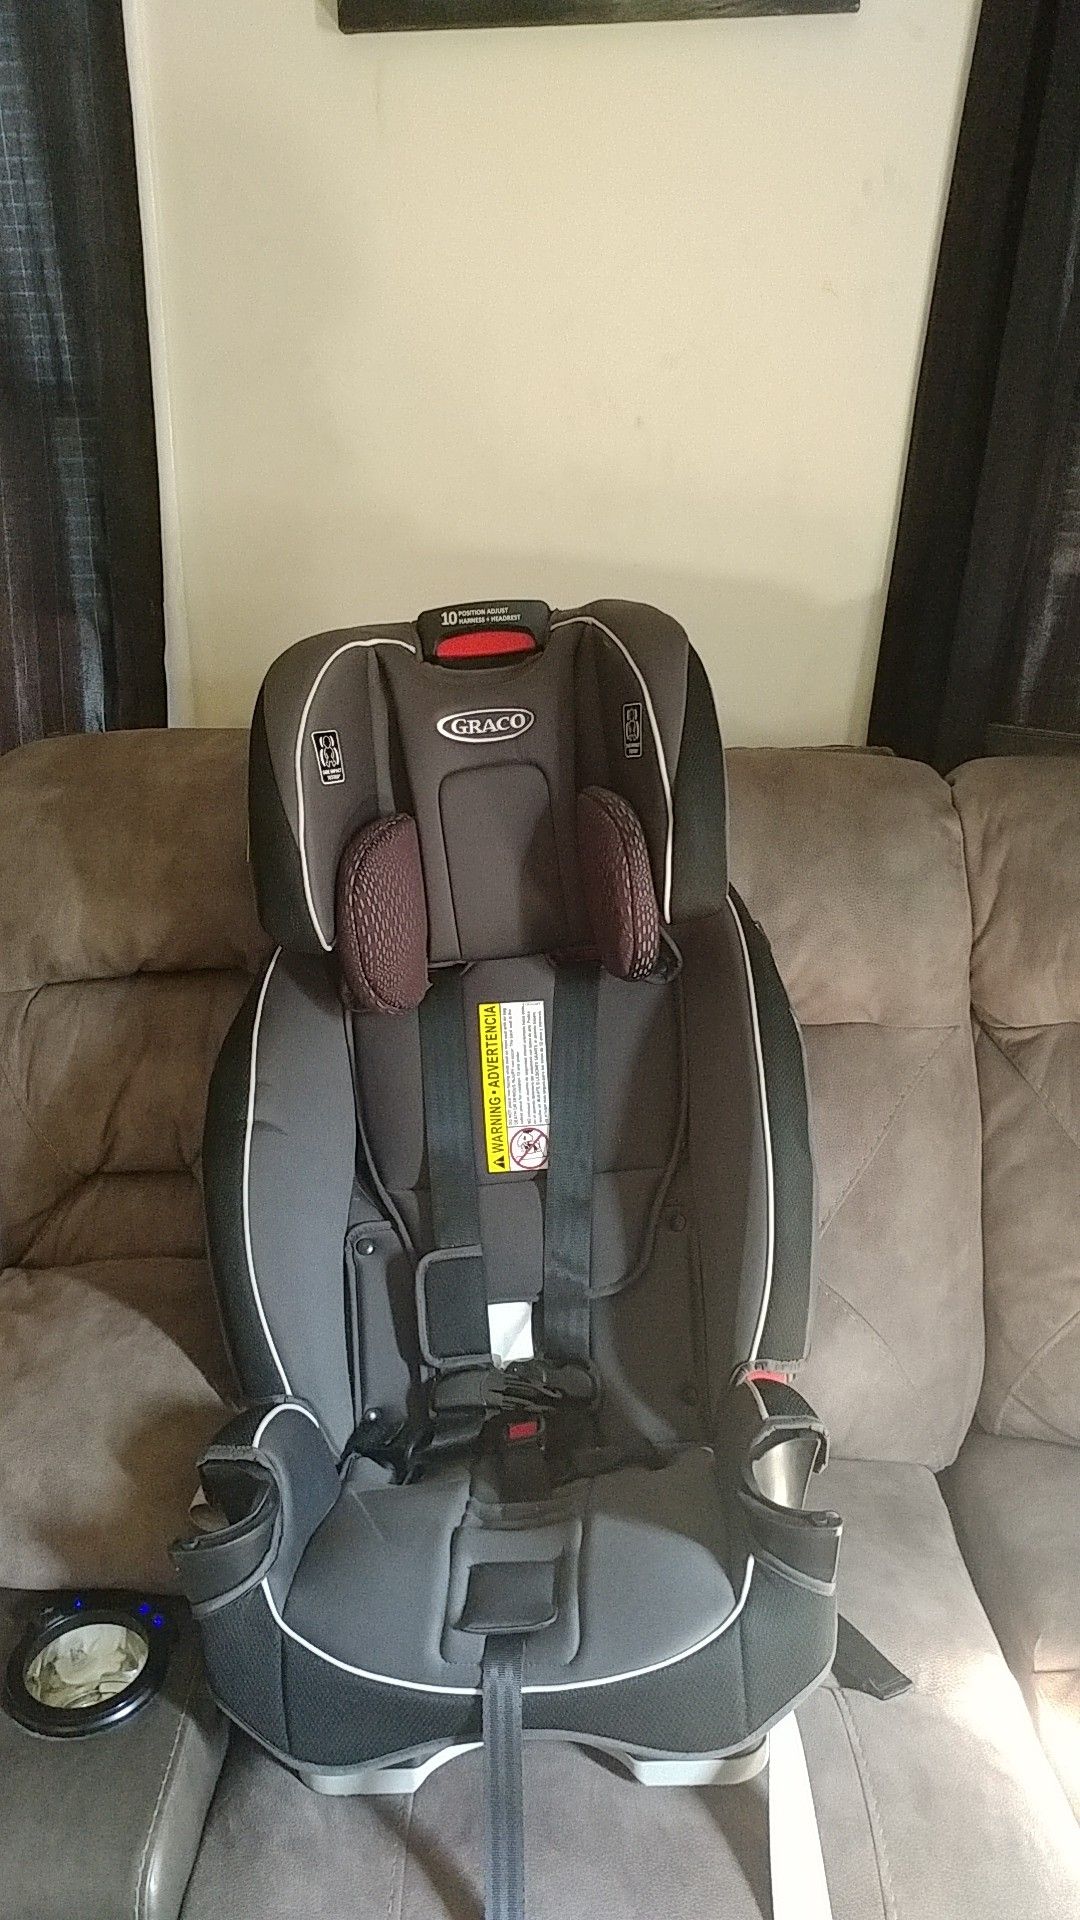 Graco Booster Seat/Car Seat